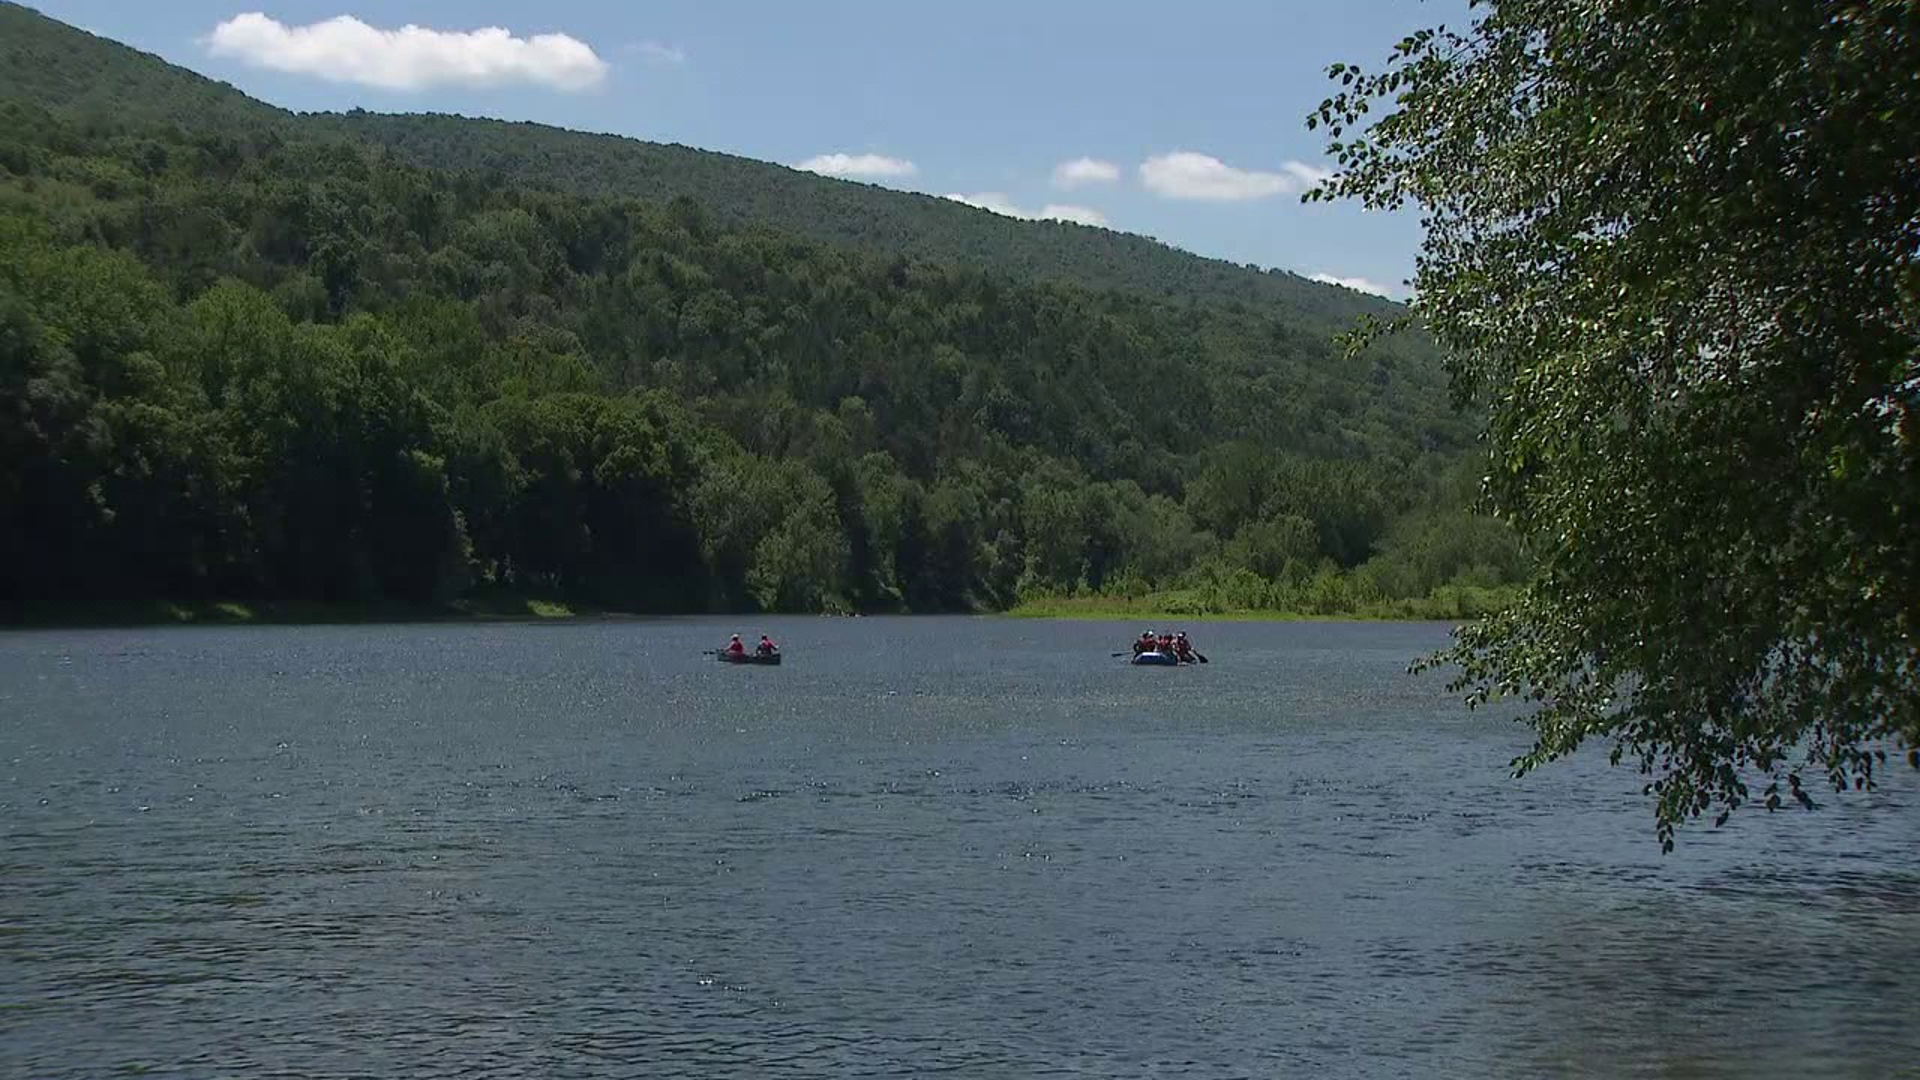 Kayak rental businesses in Monroe County are busy with visitors. Newswatch 16's Emily Kress shows us how people are spending time on the Delaware River.